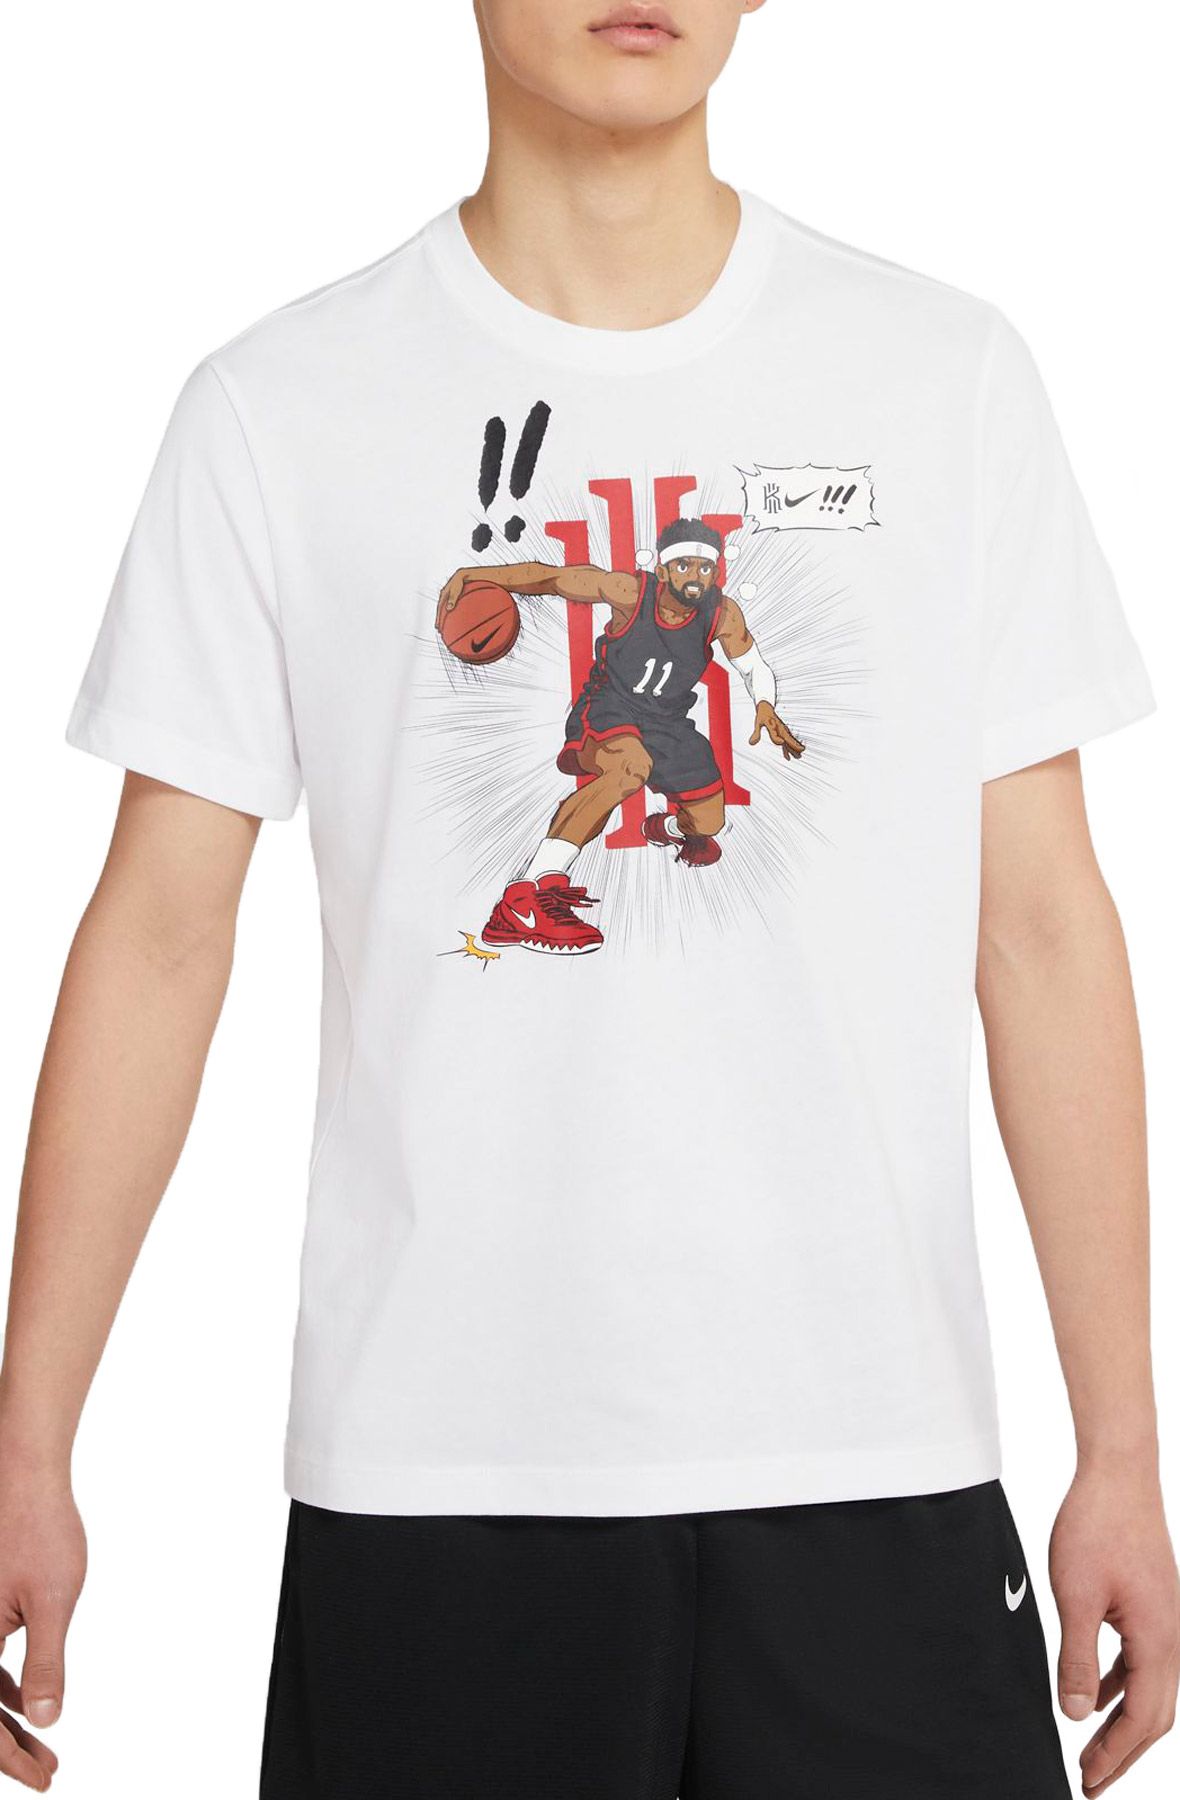 Buy Nike Men's Dry Graphic Pointguard Basketball T-Shirt, (White/Red XXL)  at